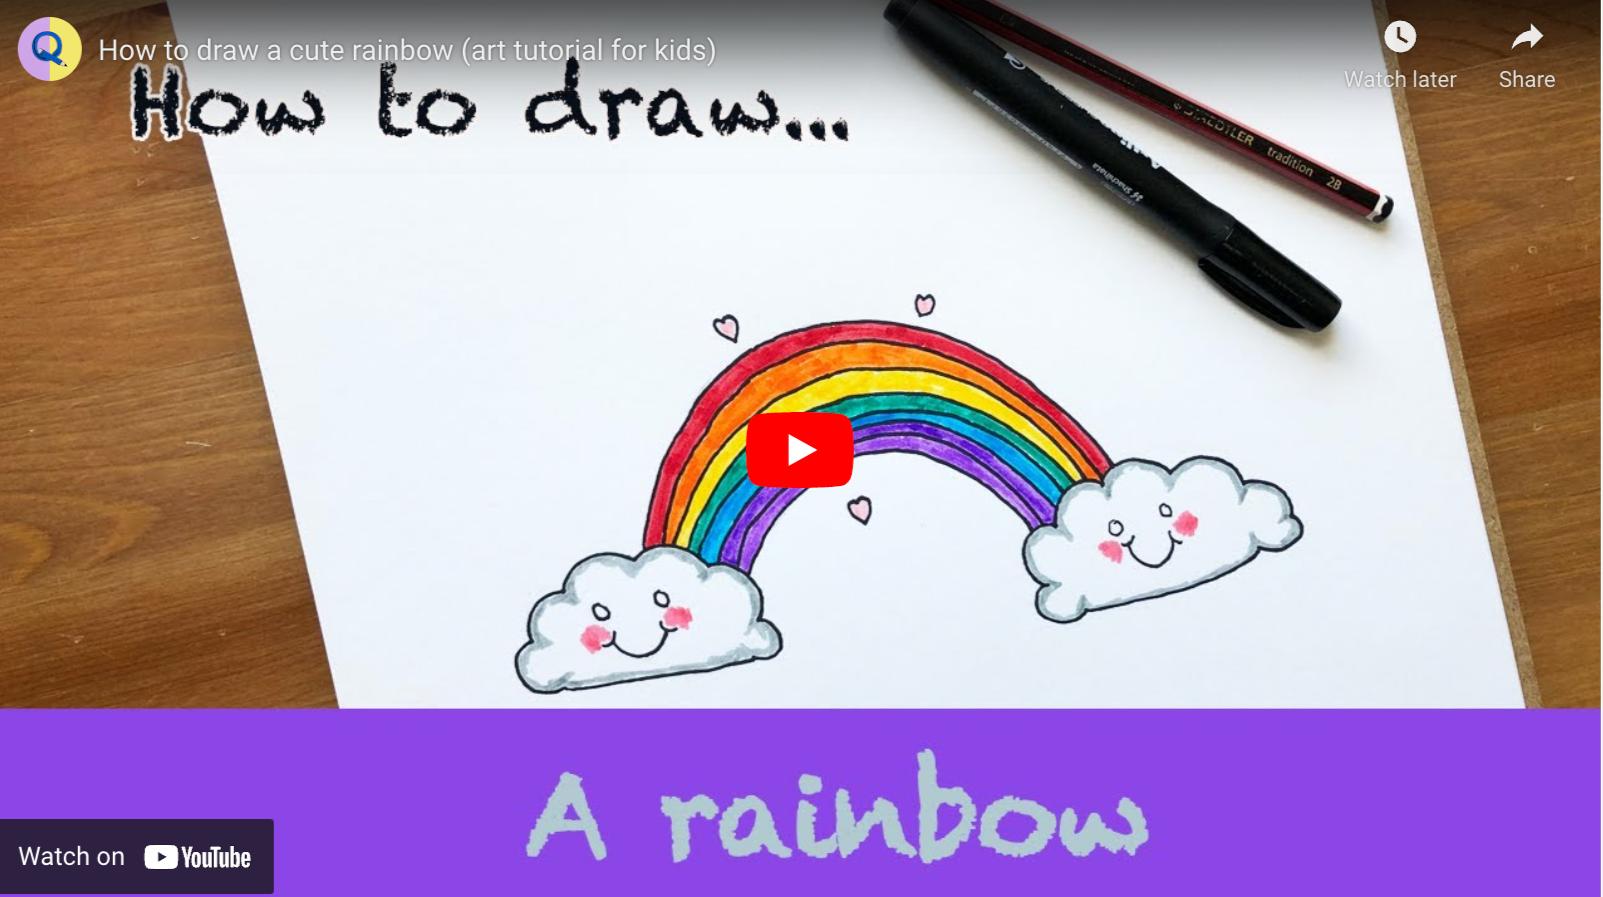 Load video: How to draw a cute rainbow video